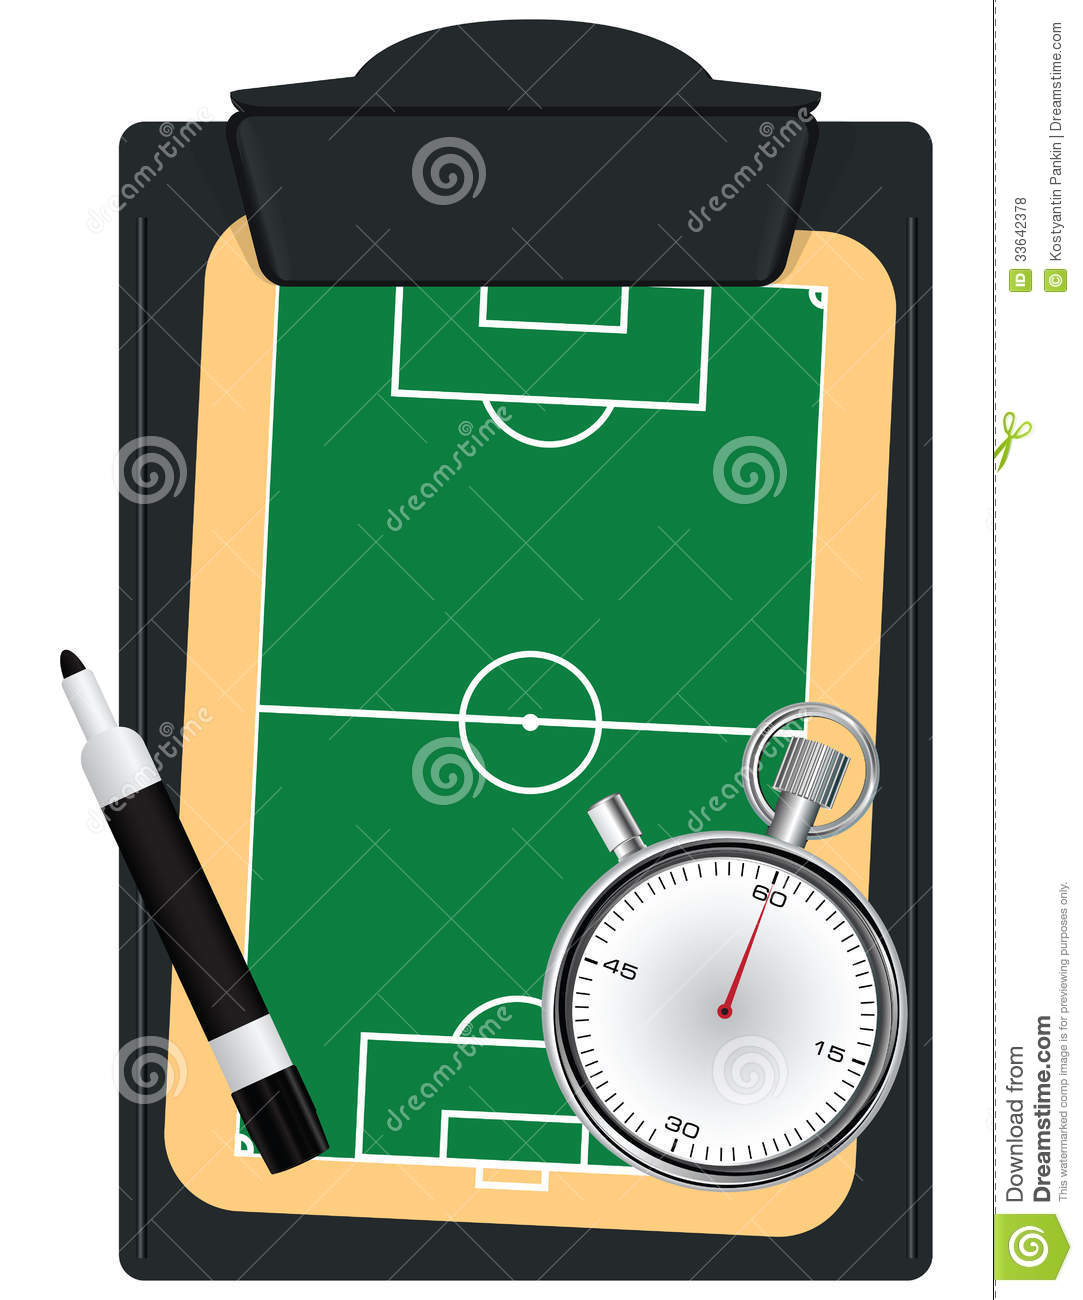 Set The Coach For The Game Of Soccer  Vector Illustration